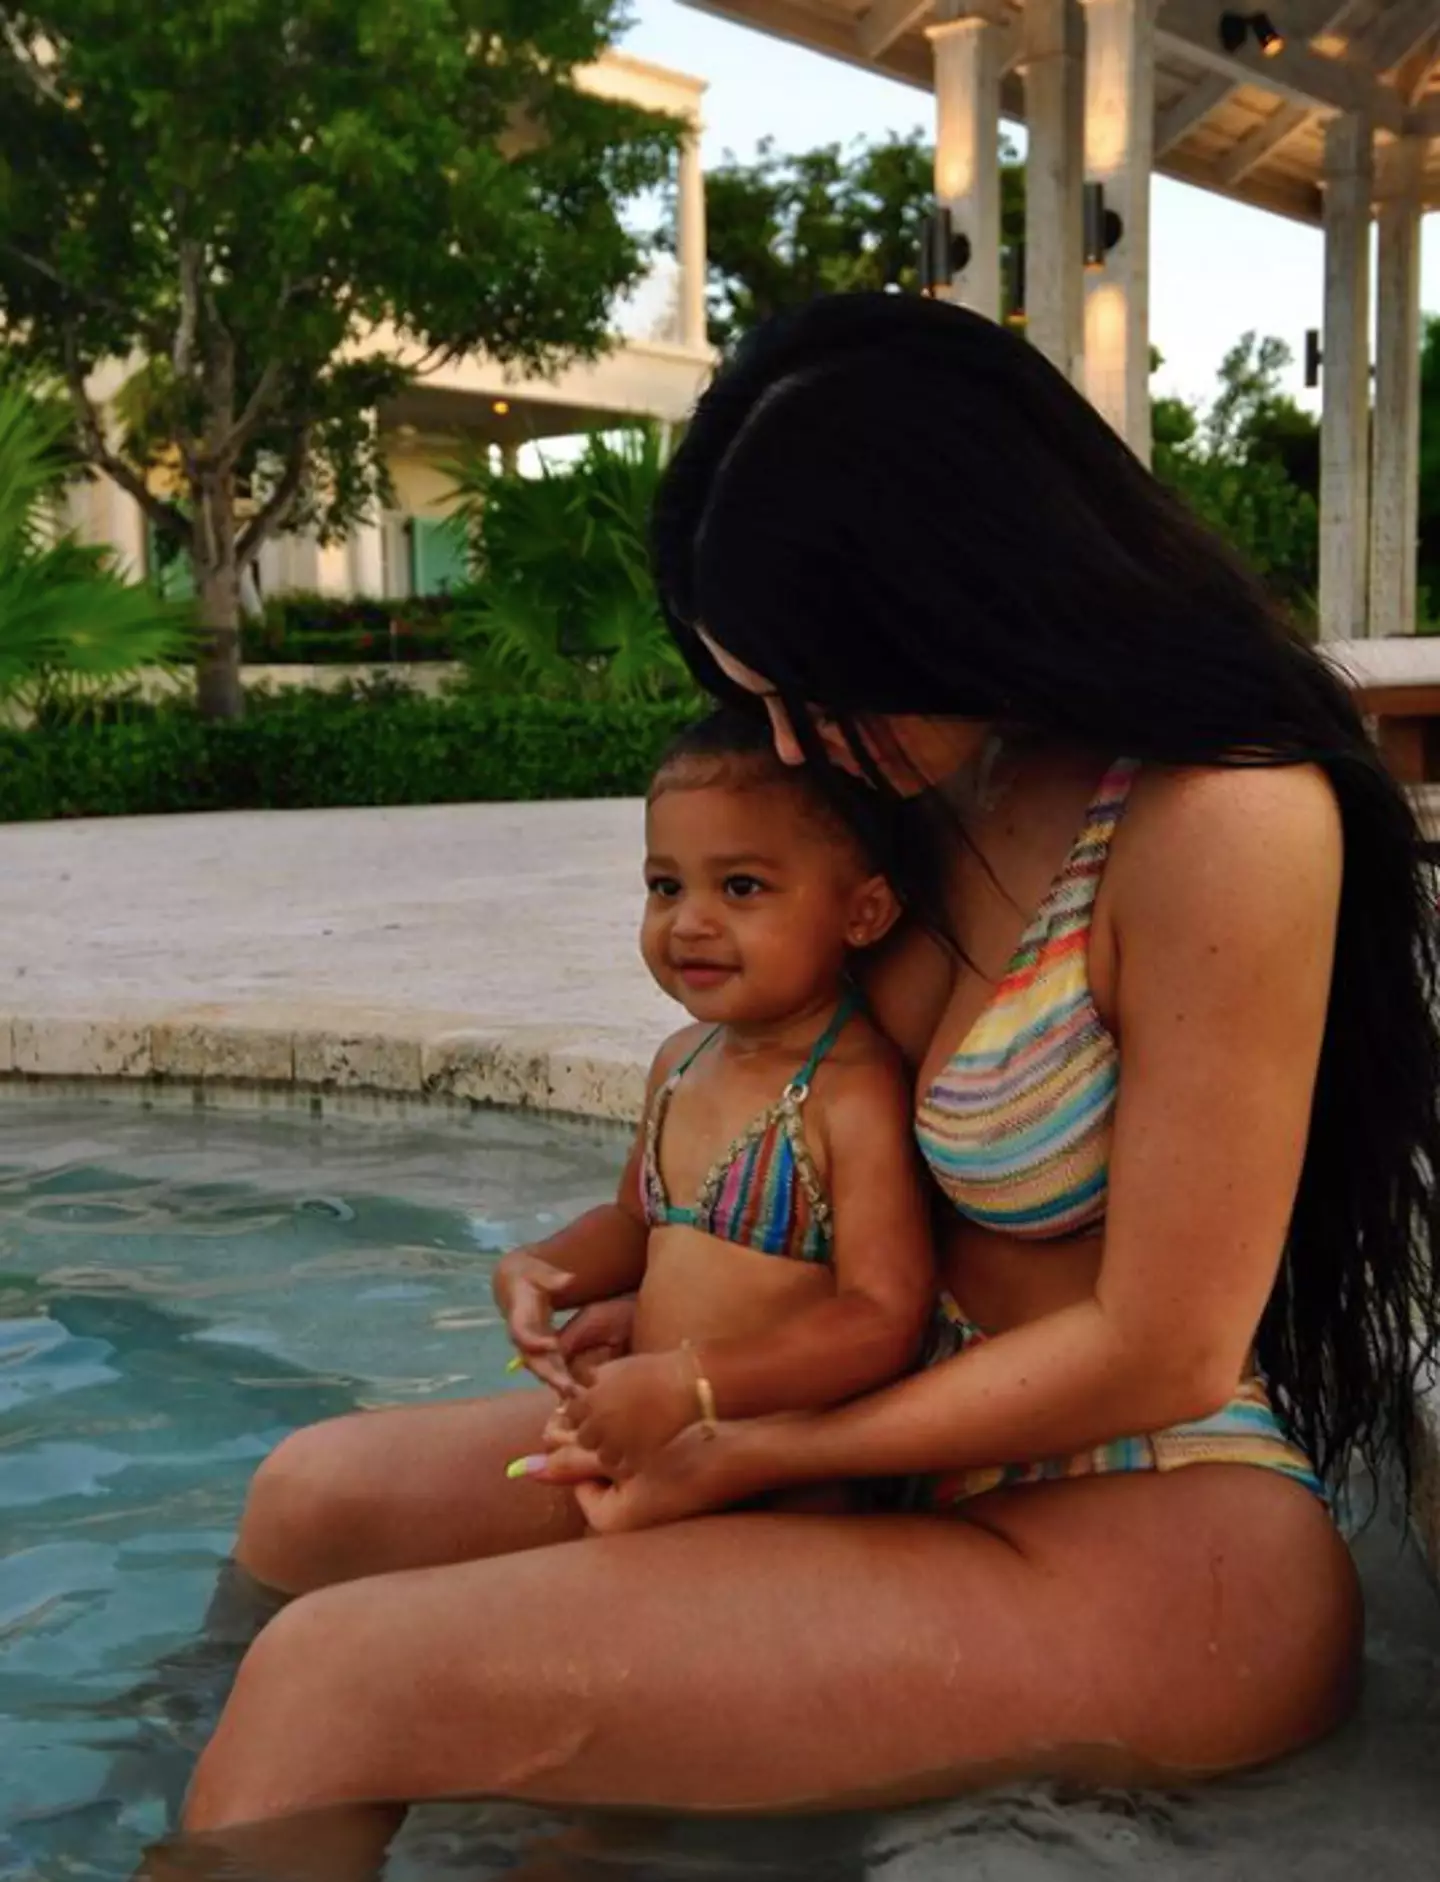 Kylie is hoping to have more children in the future (